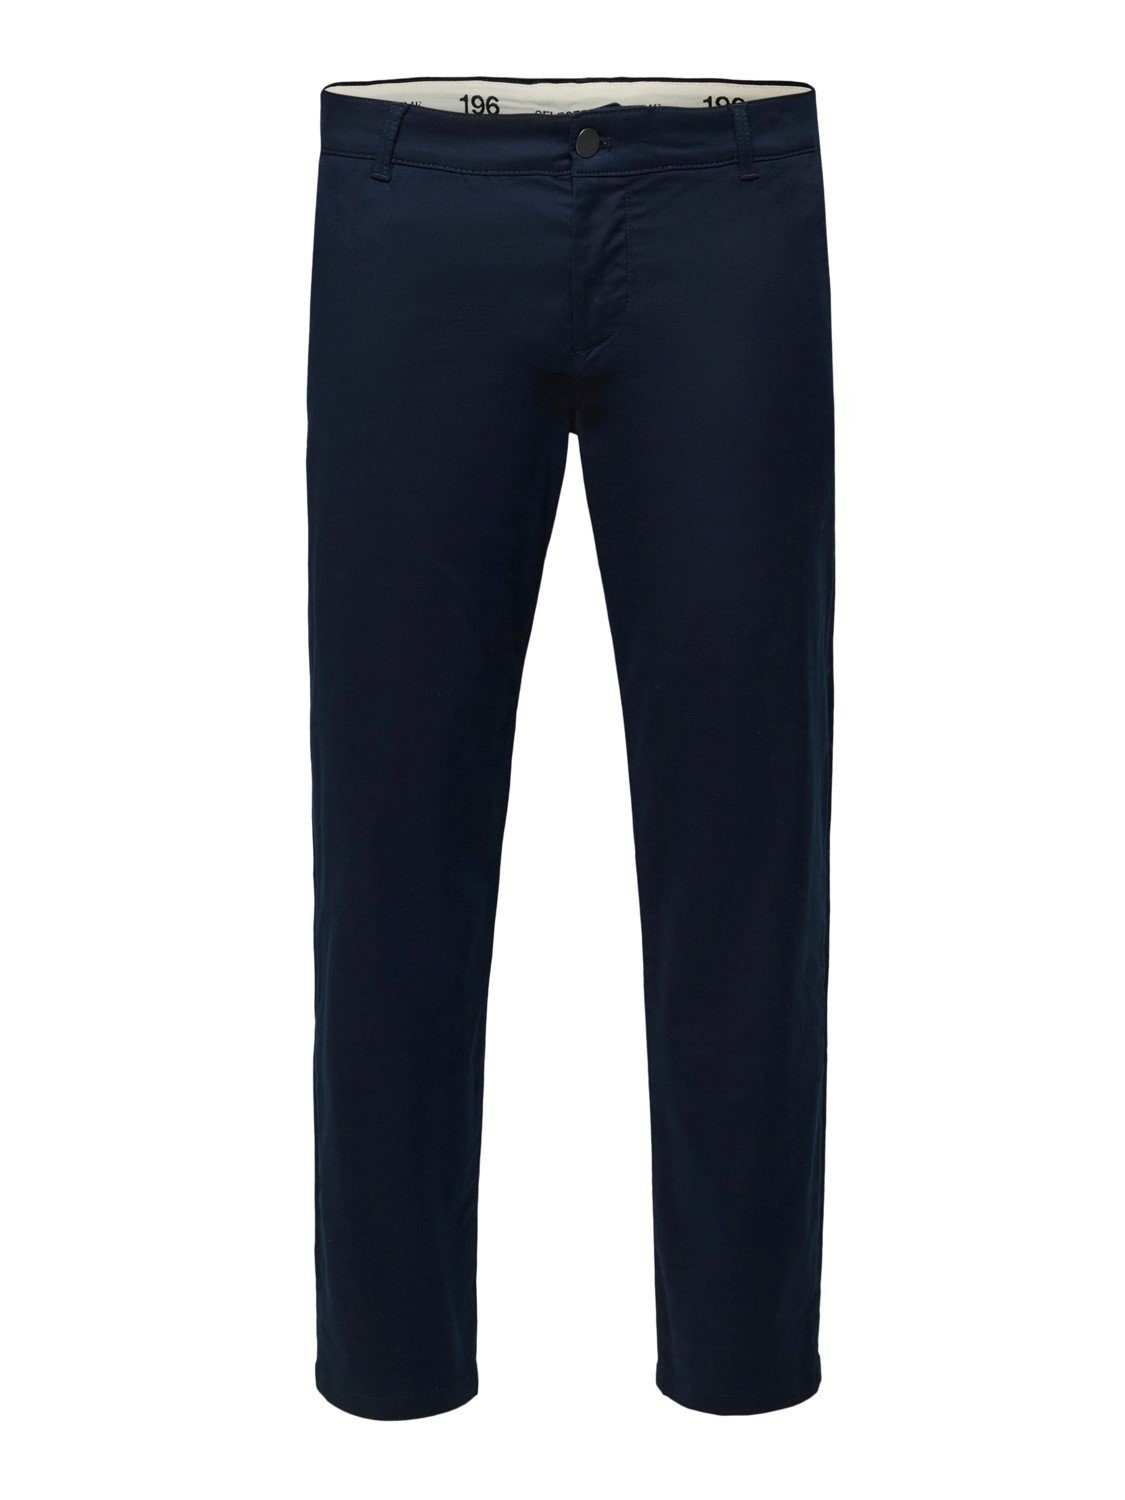 SELECTED HOMME Chinohose SLHSTRAIGHT-STOKE aus Baumwolle Dark Sapphire 16080157